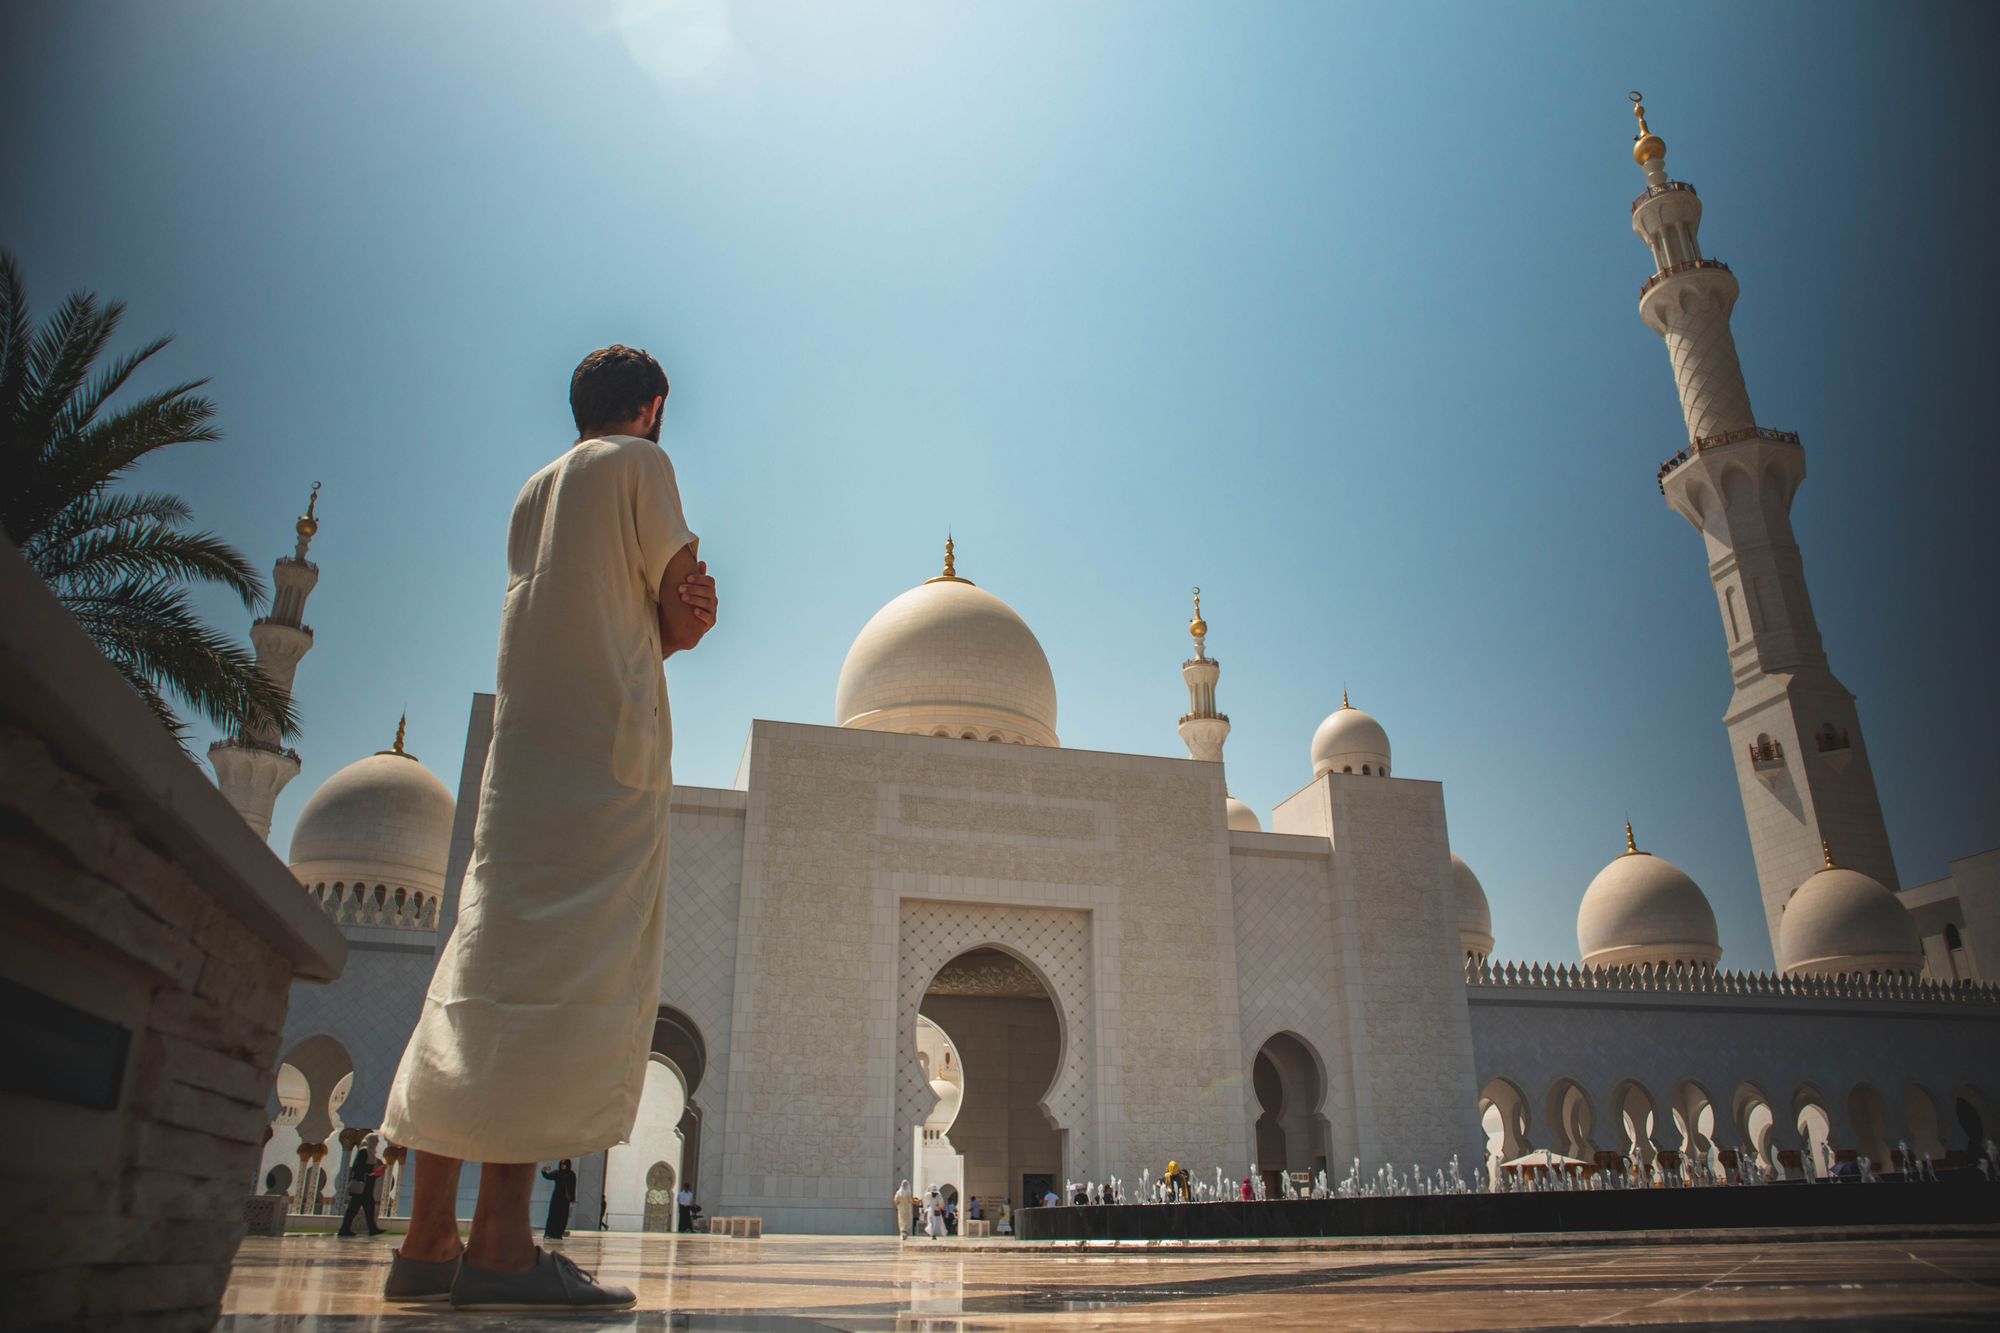 Islamic Fintech: An Ethical Financial Inclusion Proposition